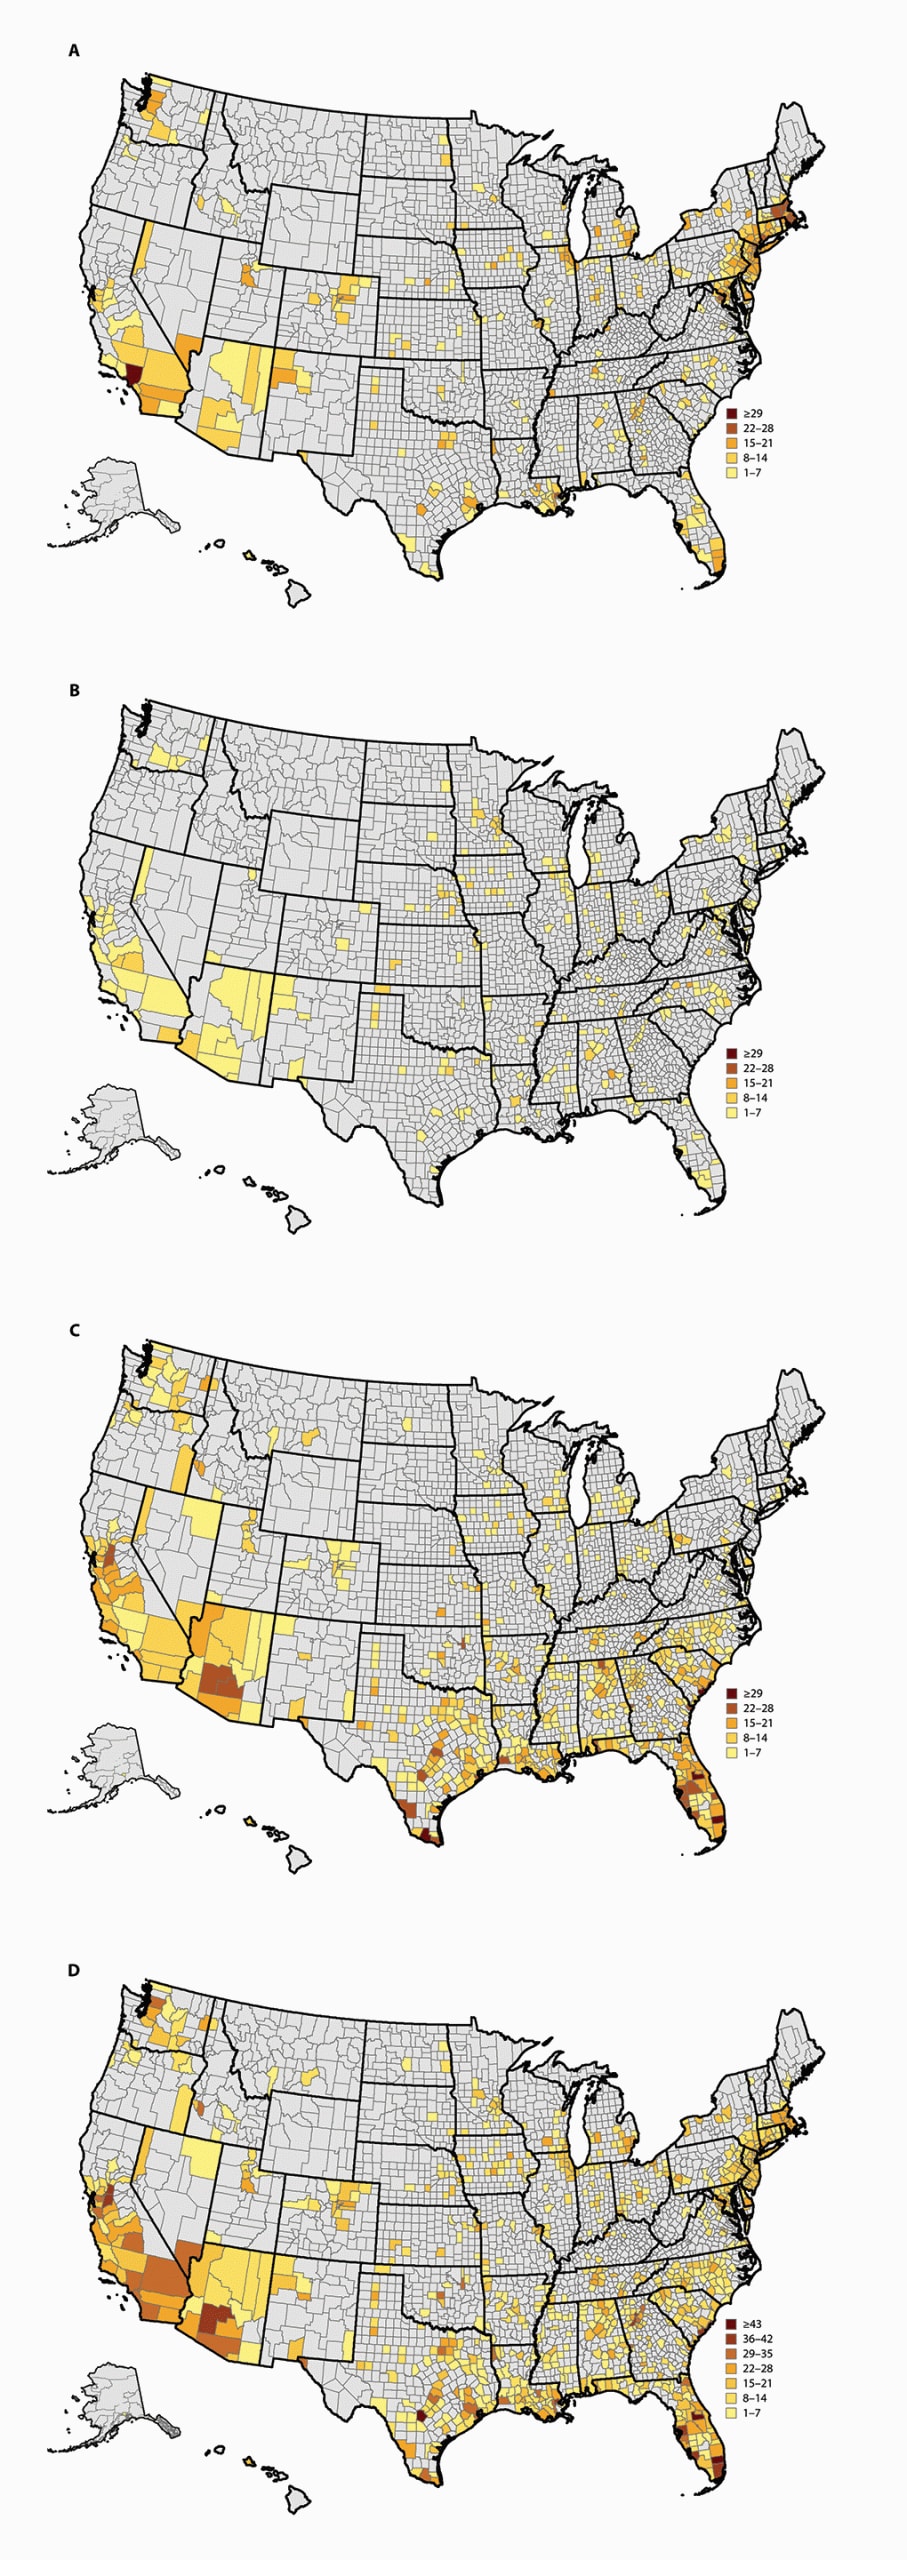 Trends in Number and Distribution of COVID-19 Hotspot Counties — United States, March 8–July 15, 2020